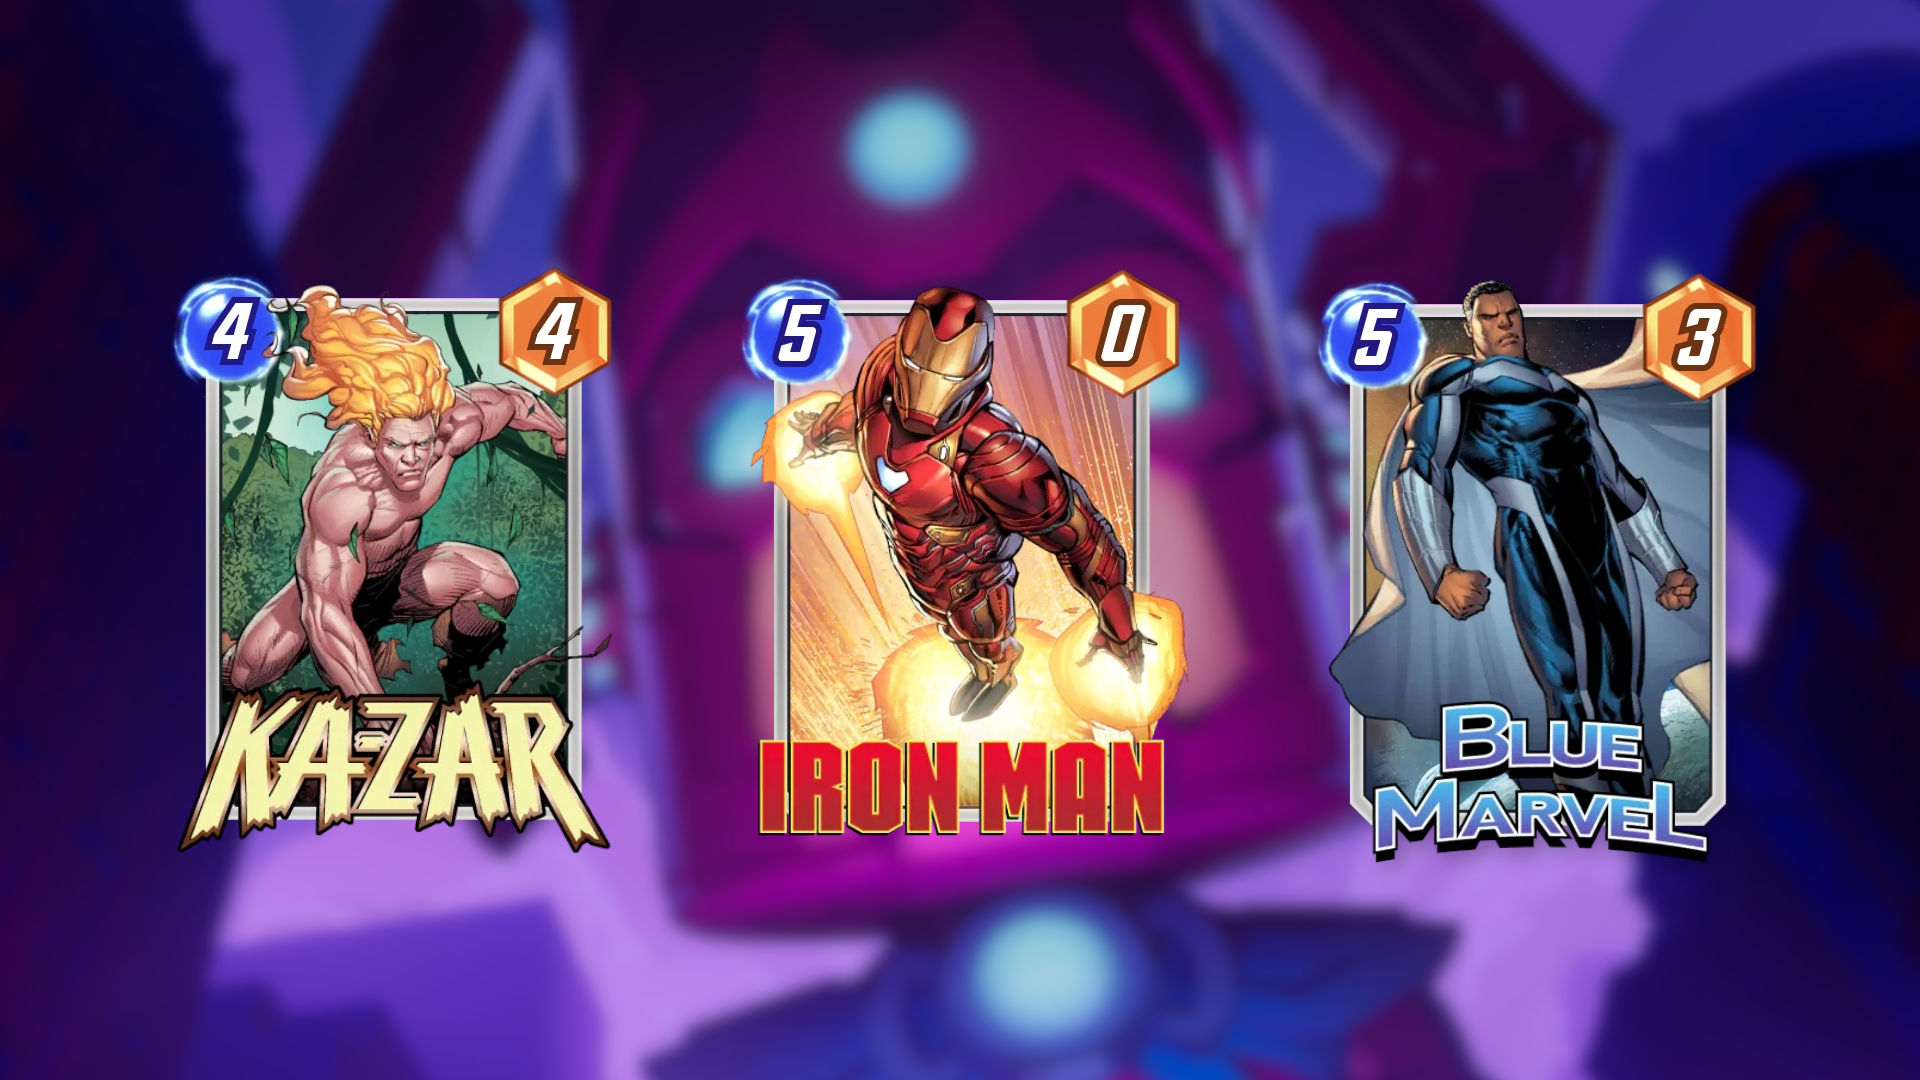 Marvel Snap tier list (April 2023) - Meta deck lists and best cards